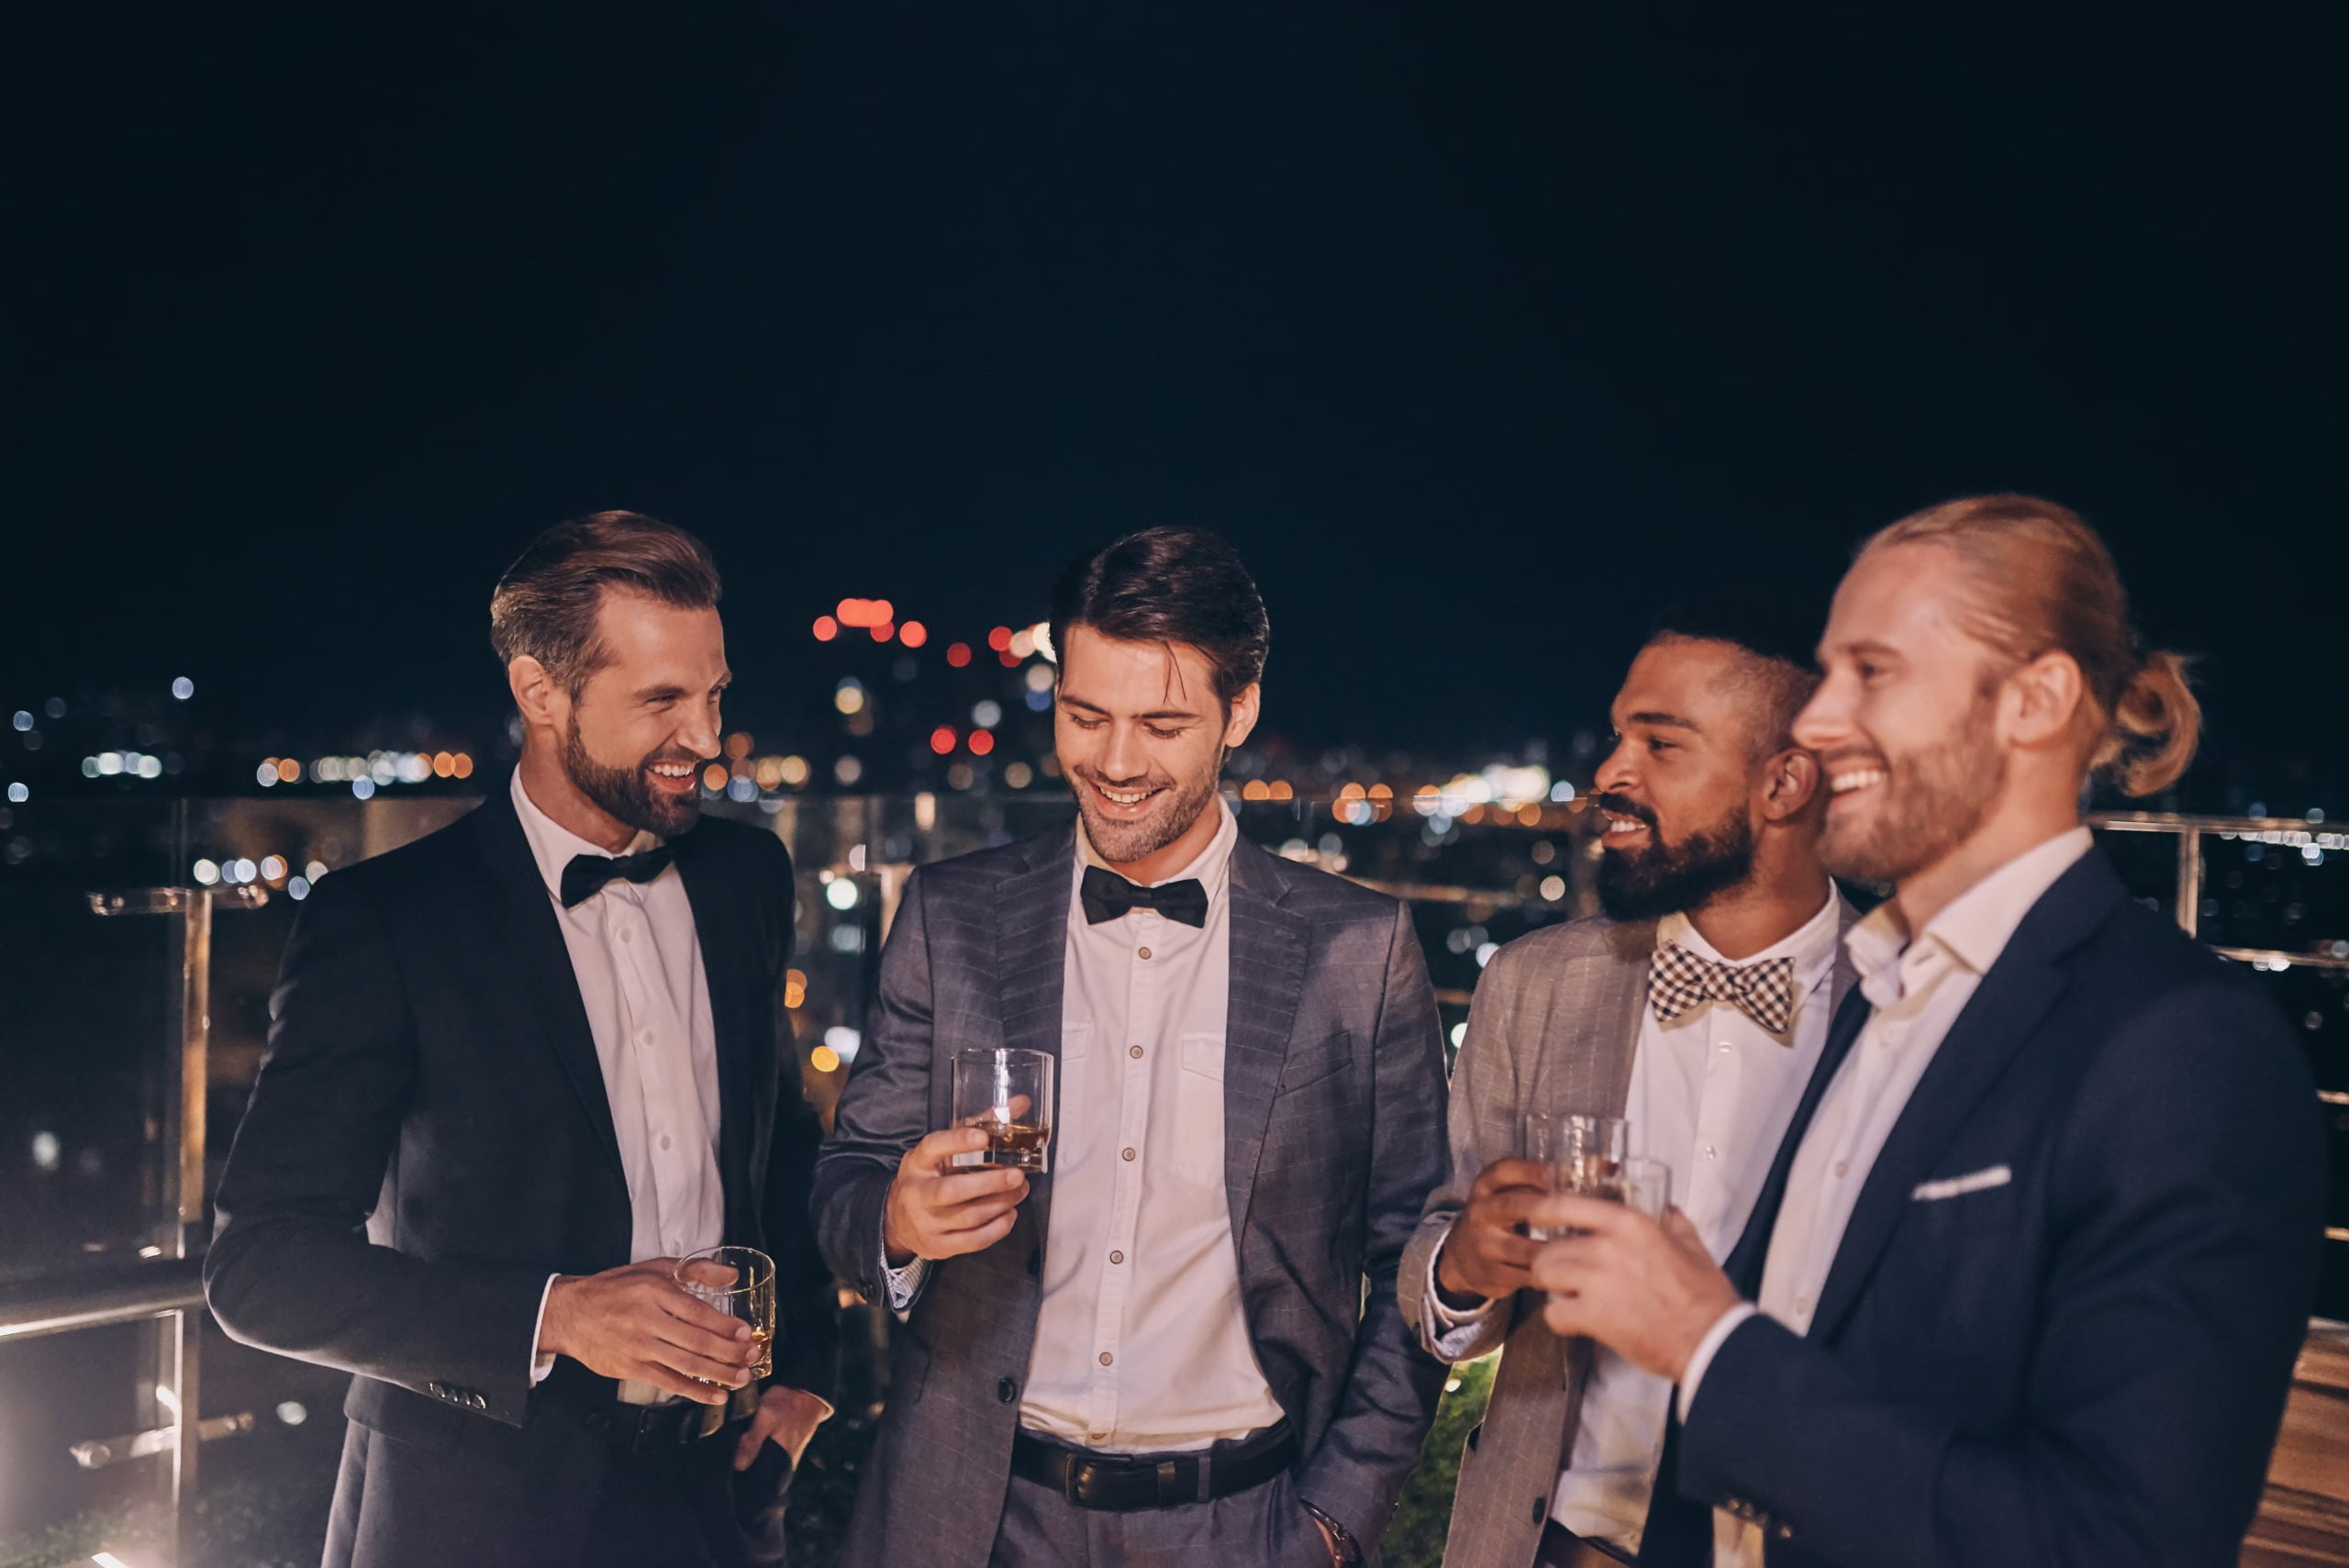 Group of handsome young men in suits and bowties drinking whiske